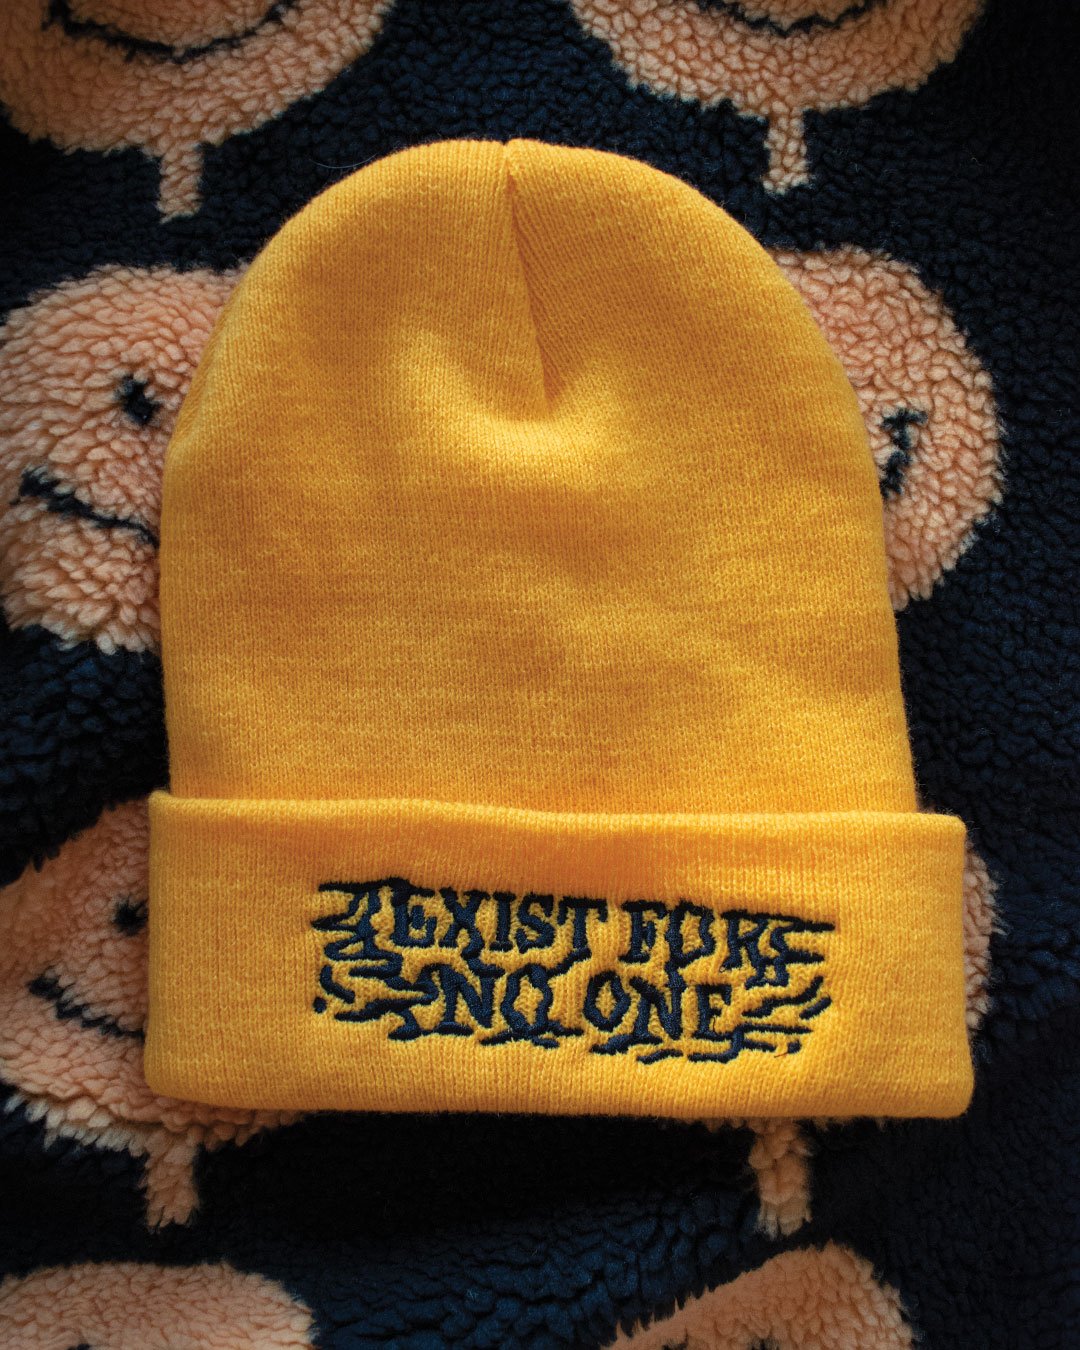 Exist For No One Beanies